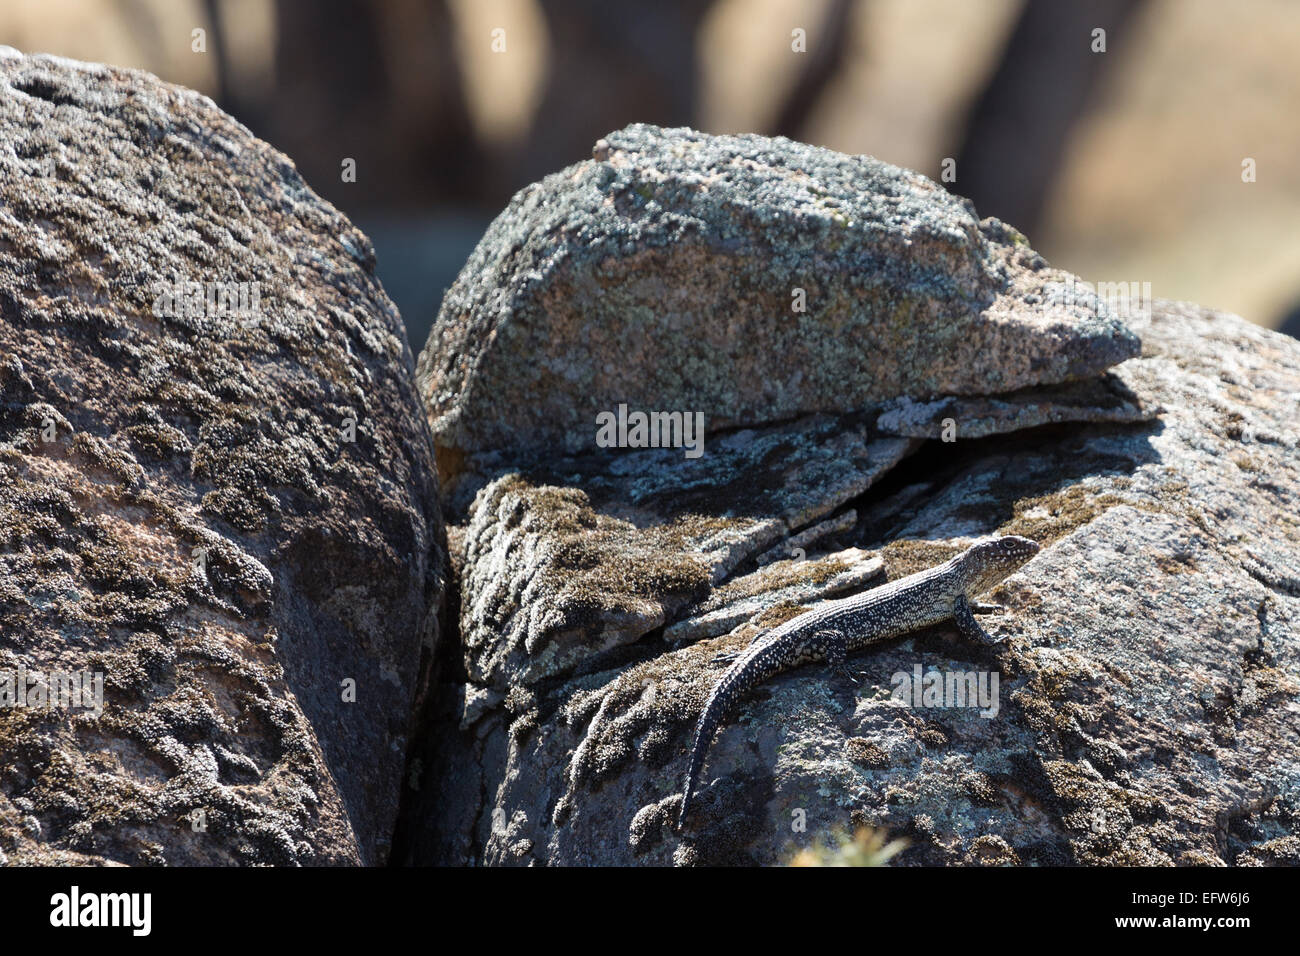 A photograph of a Cunningham's Skink on a granite boulder in central western NSW, Australia. Stock Photo